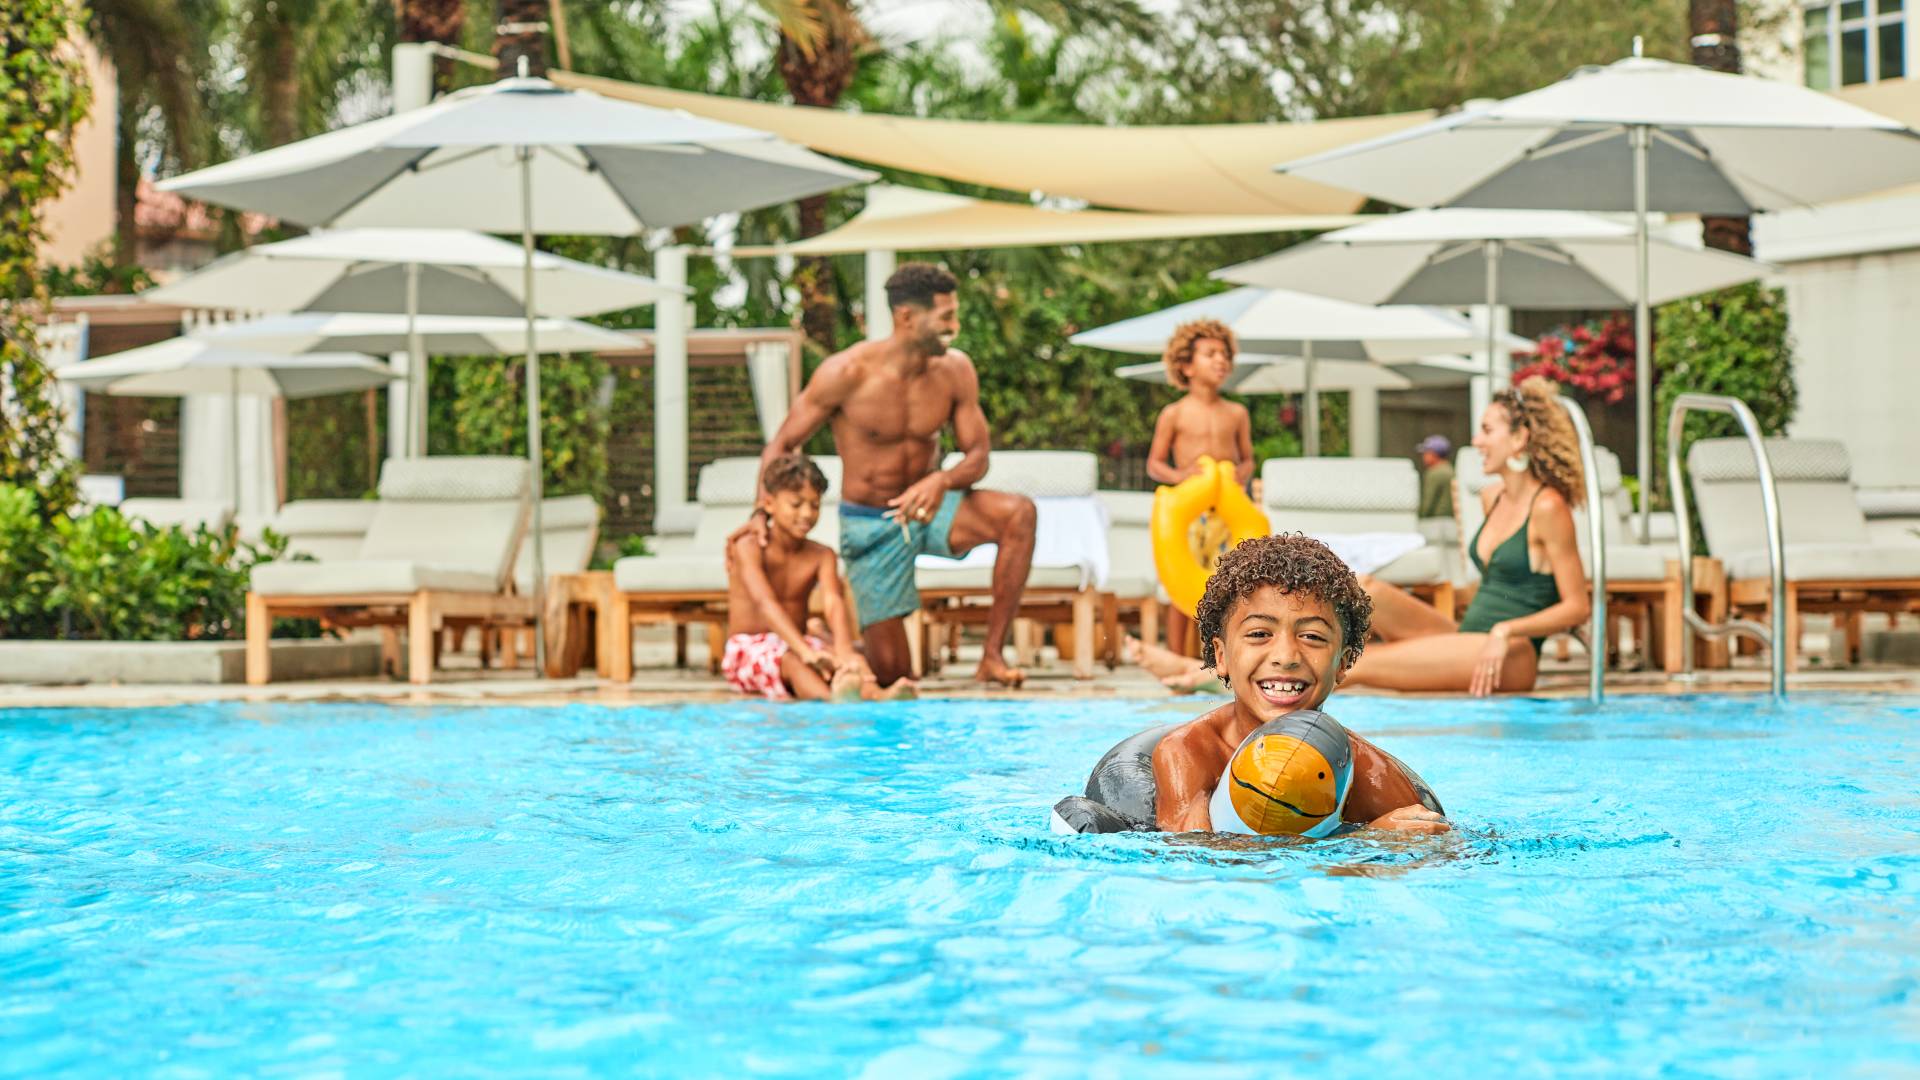 Family relaxing by the pool, with young child smiling as he floats in water